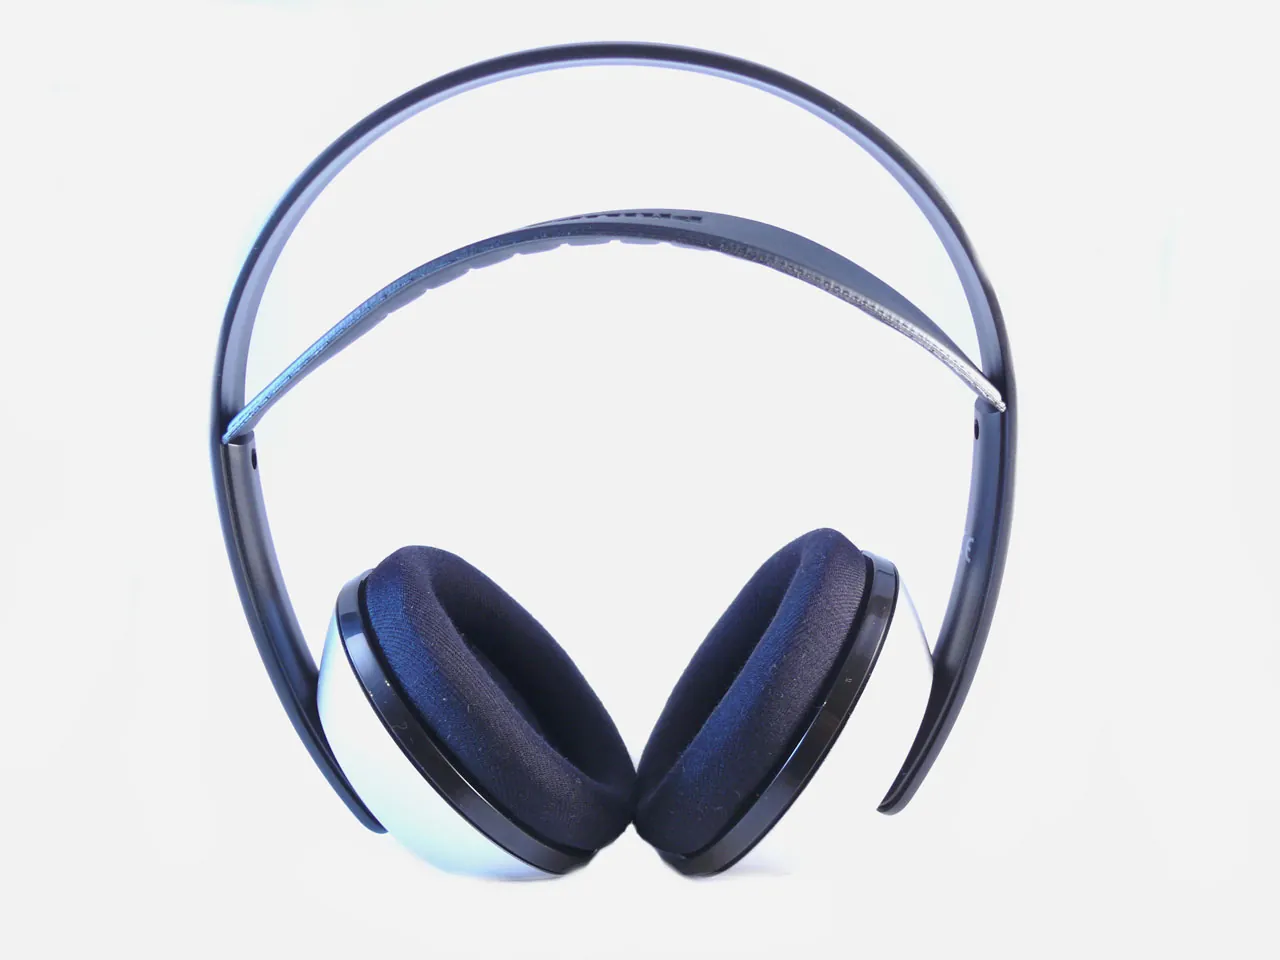 Shown is a pair of adjustable, black, over-the-ear headphones.